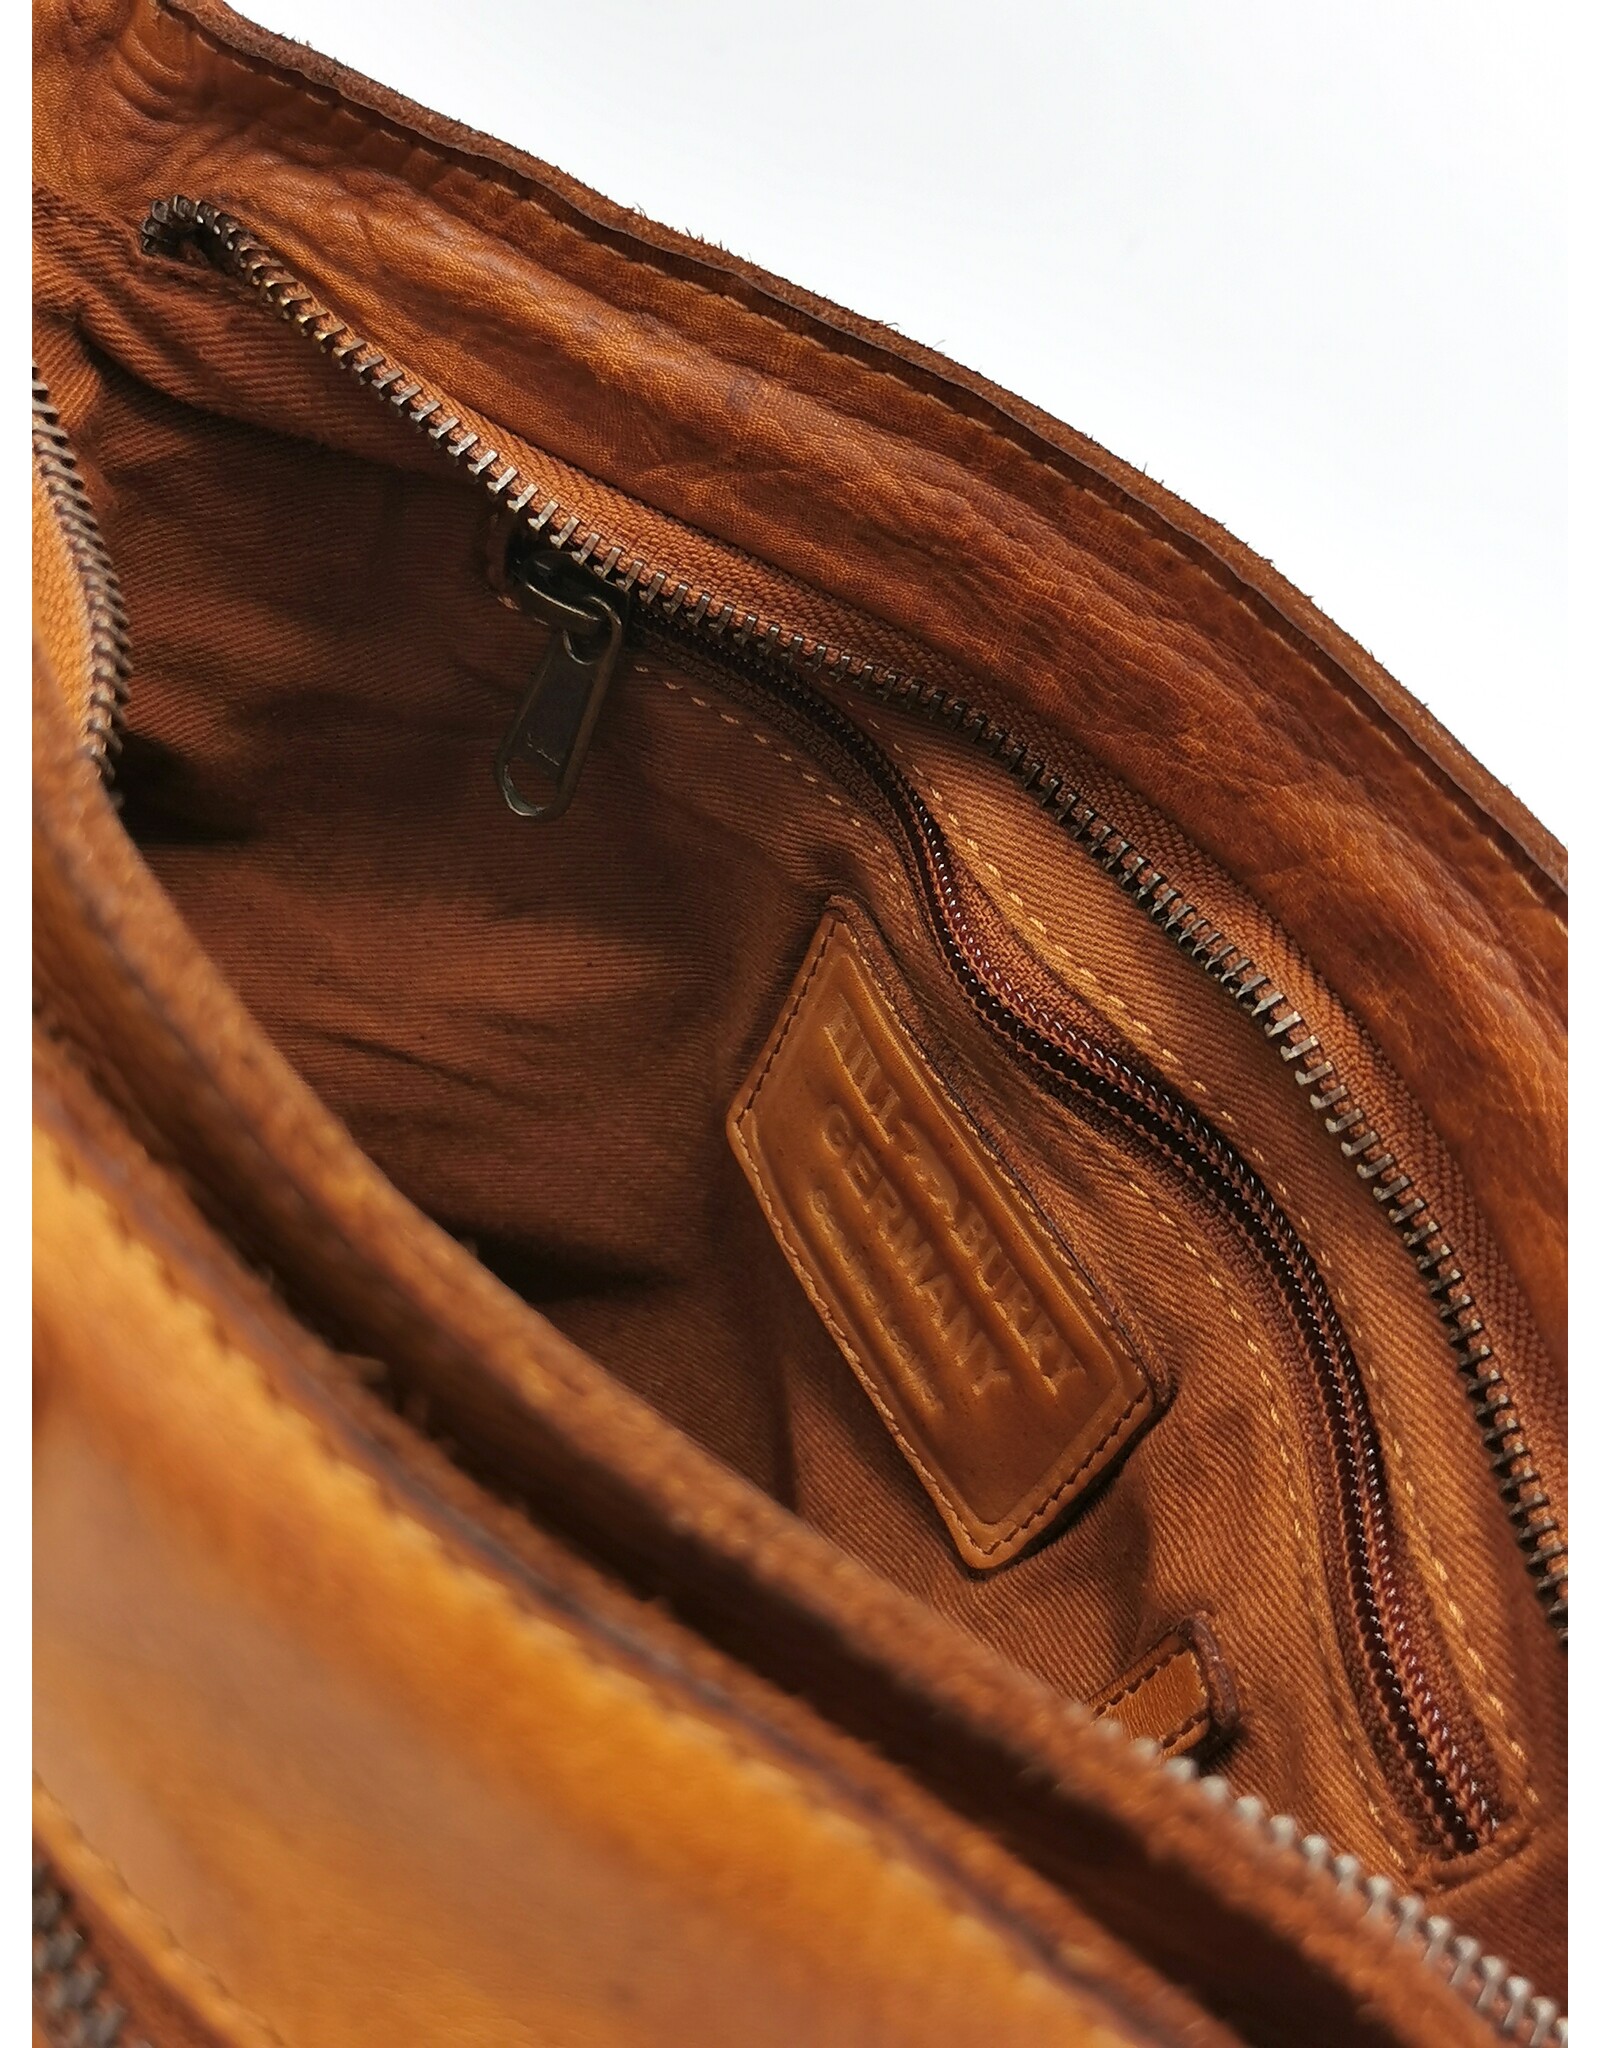 HillBurry Leather Shoulder bags  leather crossbody bags - HillBurry Shoulder Bag with multiple pockets washed leather cognac